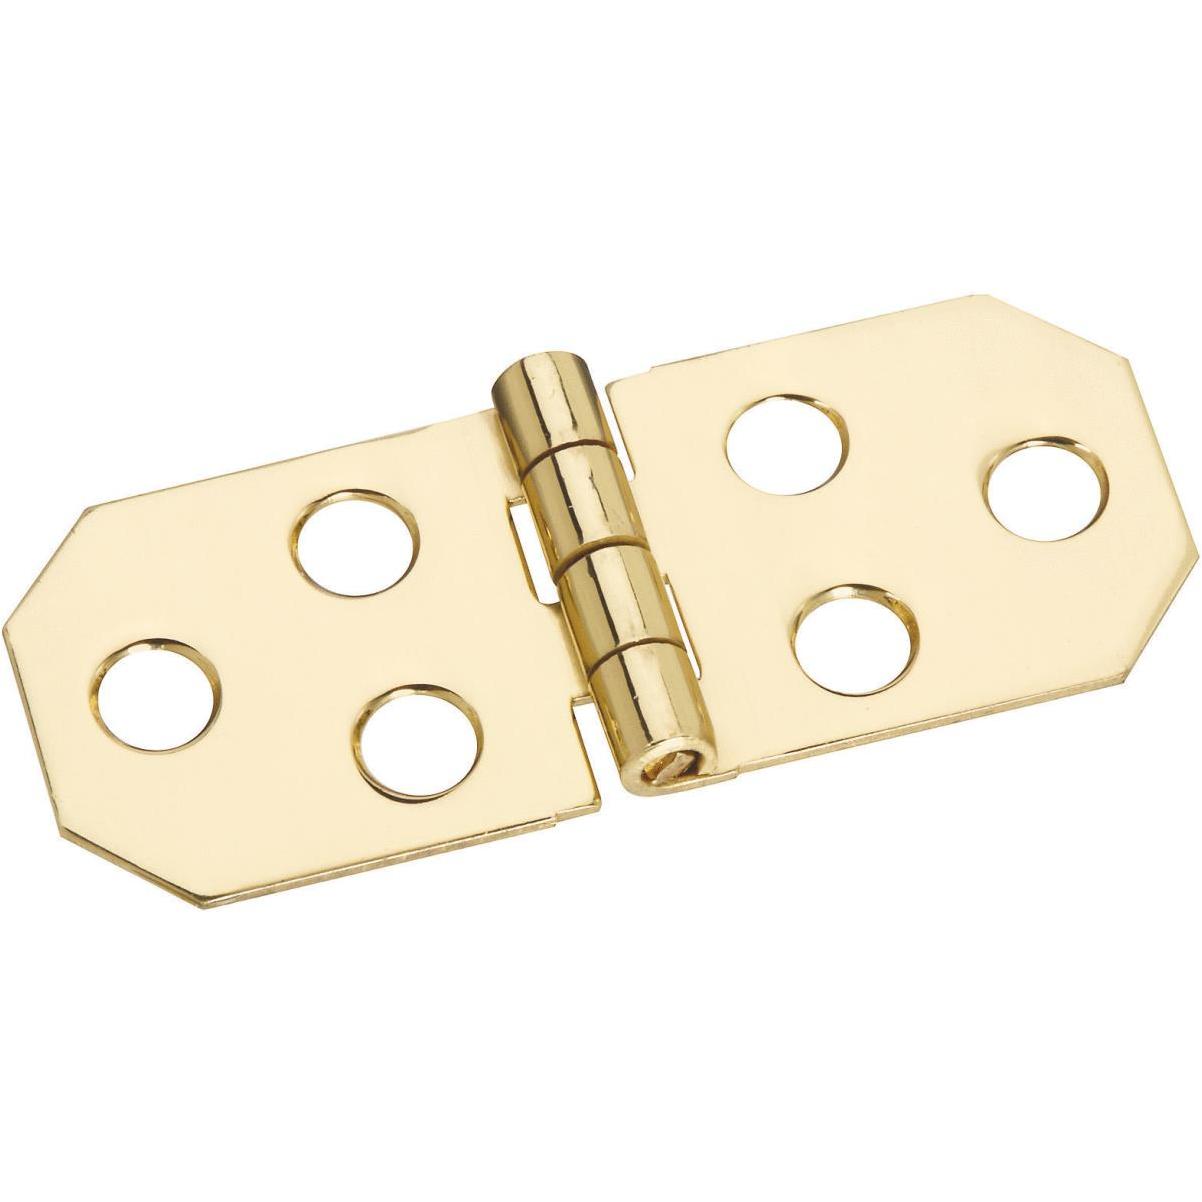 1-inch Solid Brass Narrow Hinge (4-Pack)